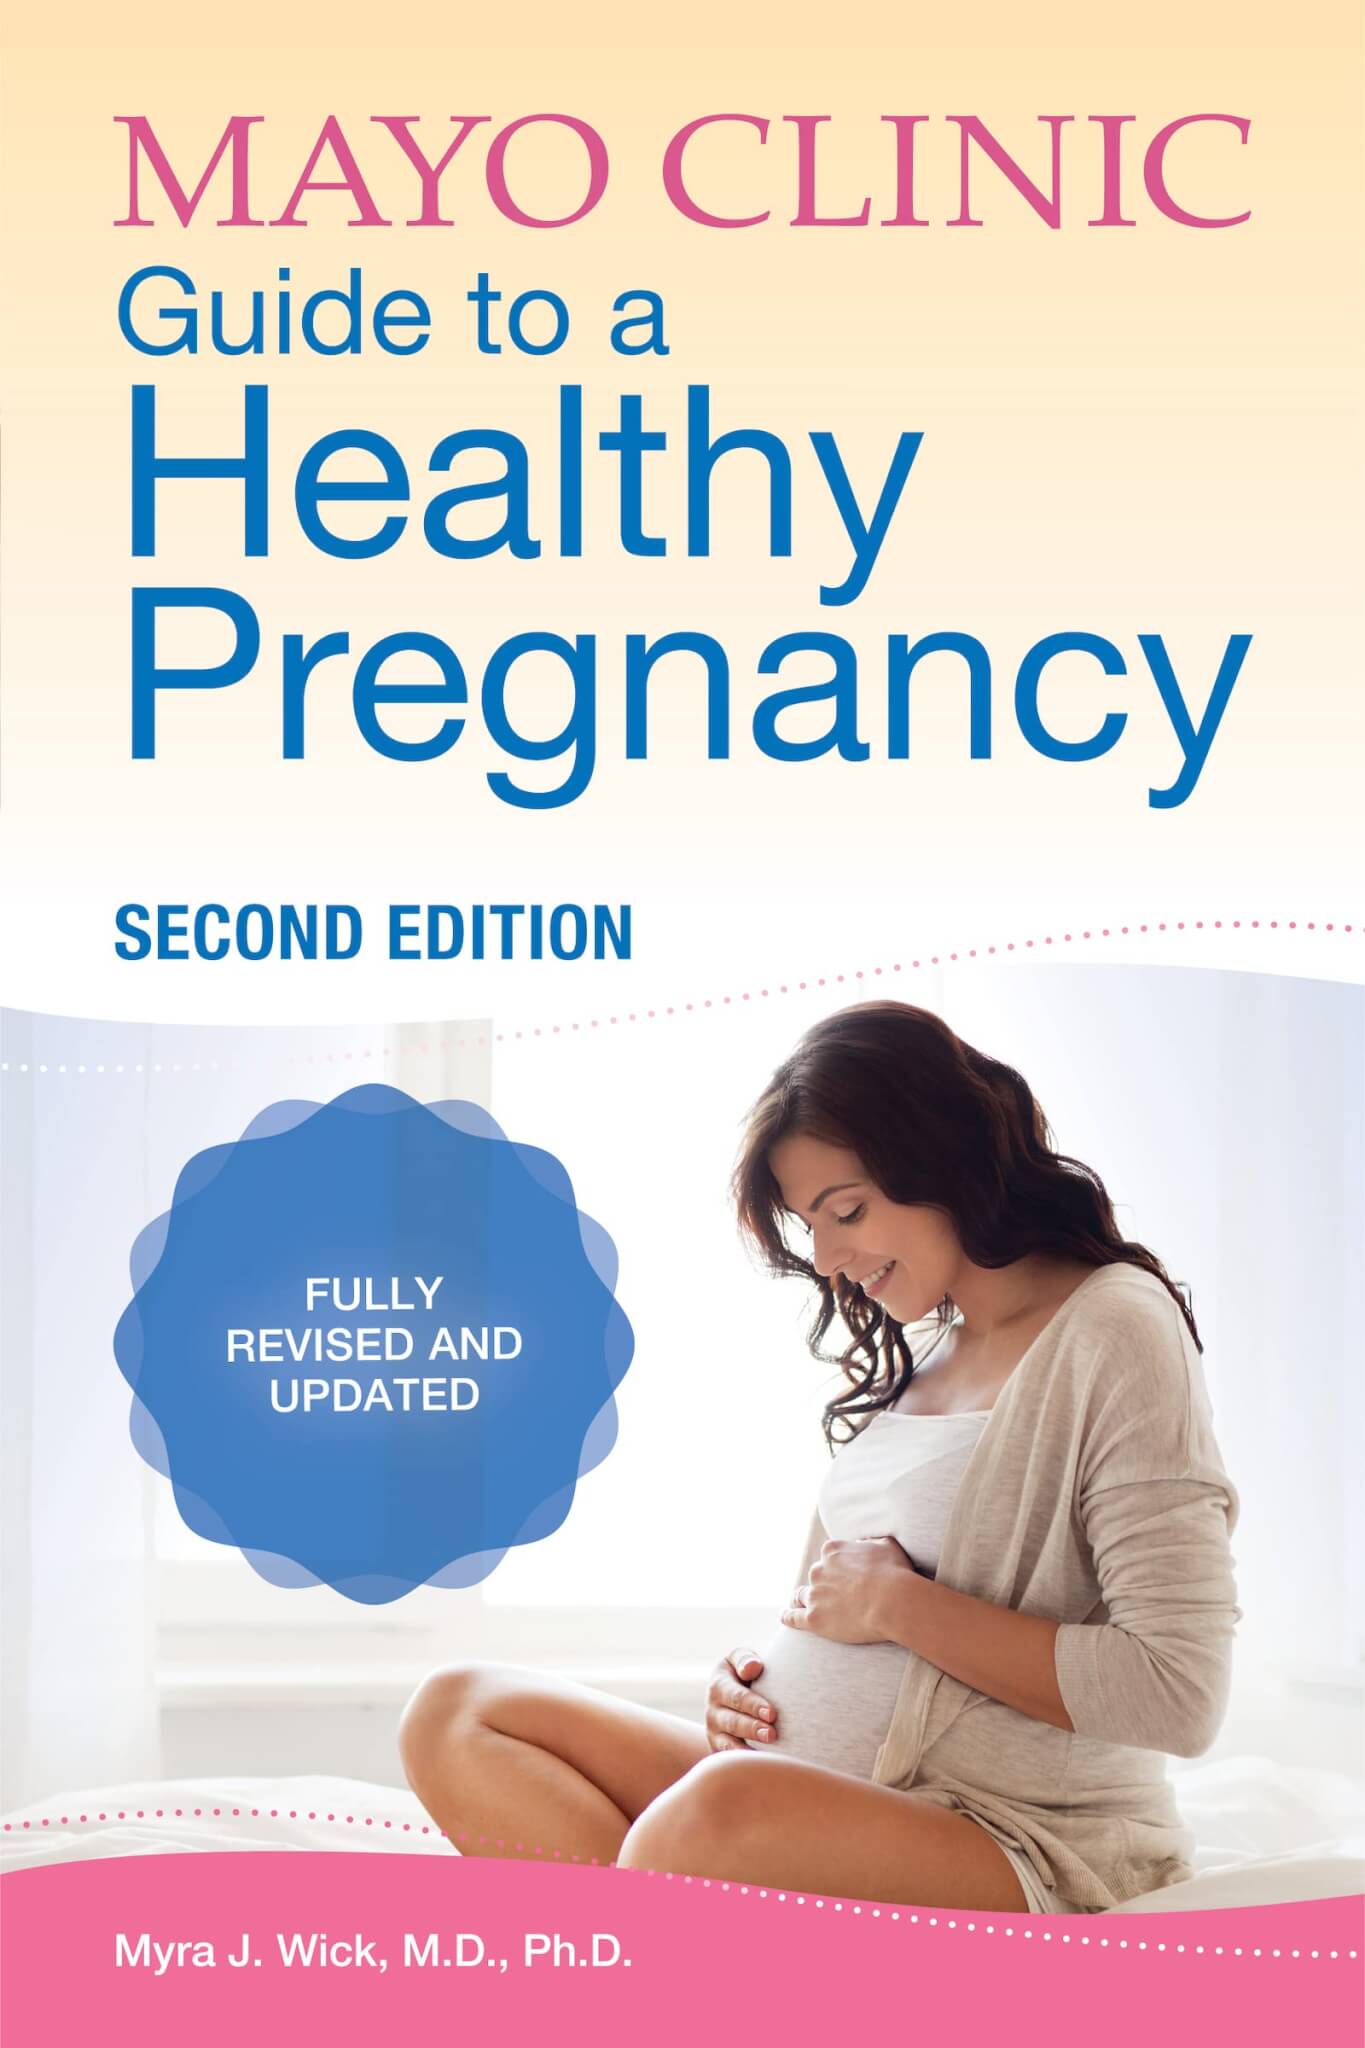 “Mayo Clinic Guide to a Healthy Pregnancy” by Dr. Myra J. Wick